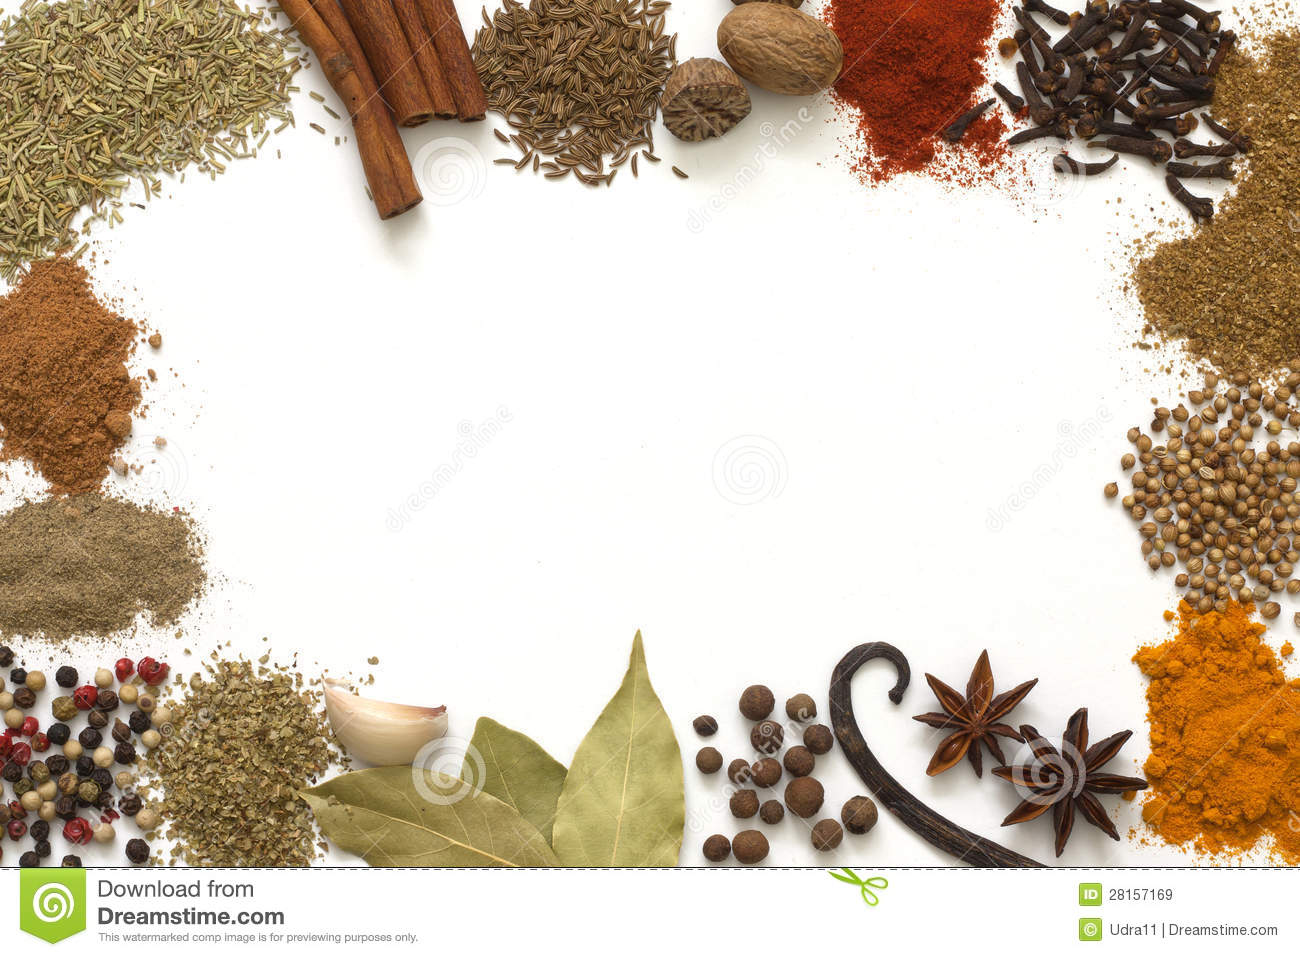 Herbs And Spices Border Royalty Free Stock Images   Image  28157169